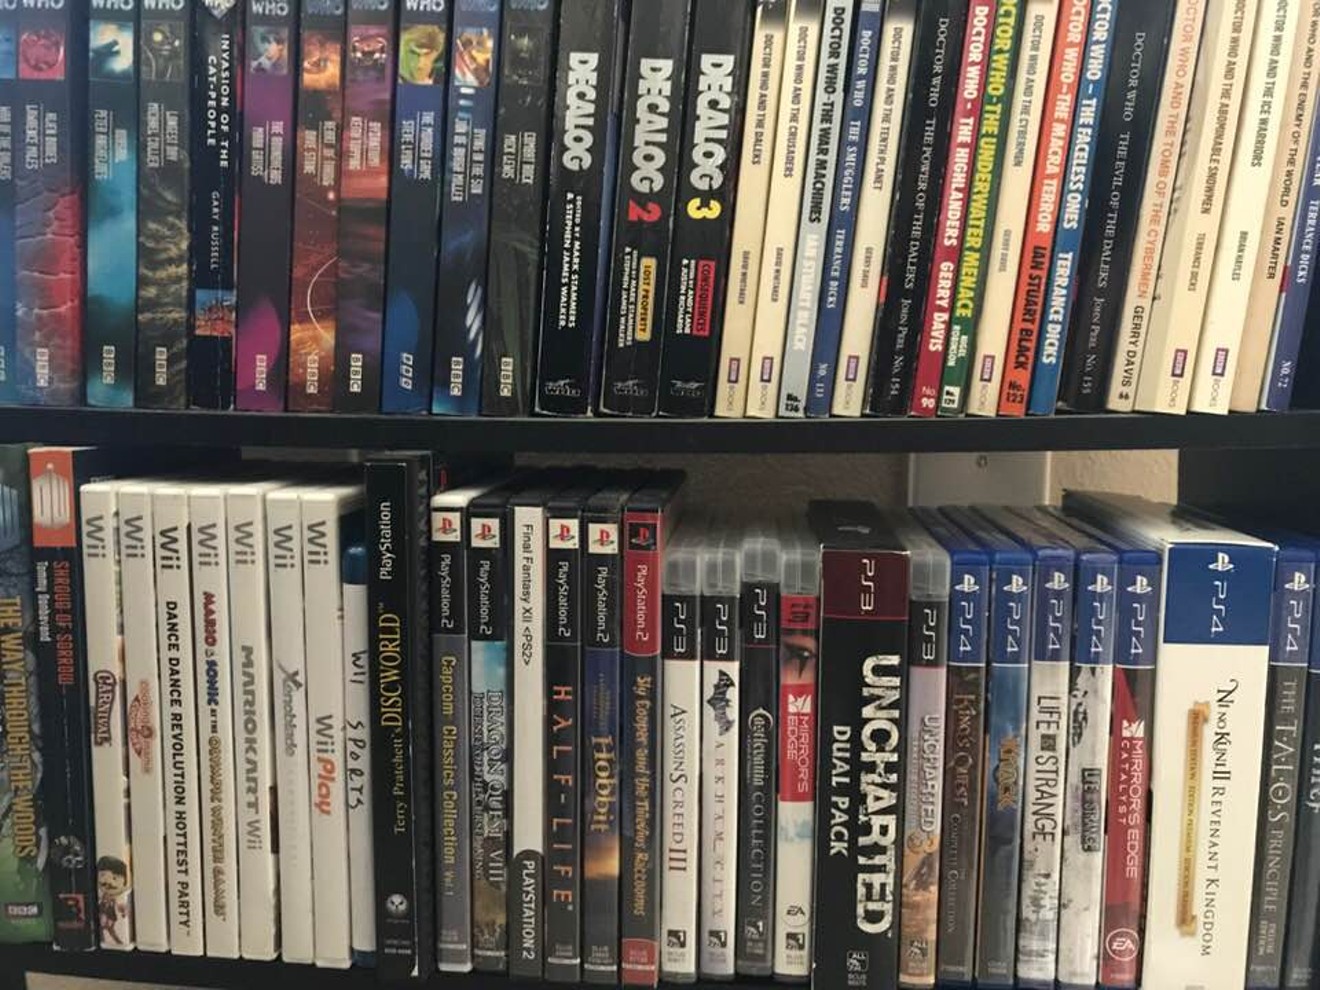 Part of my game collection